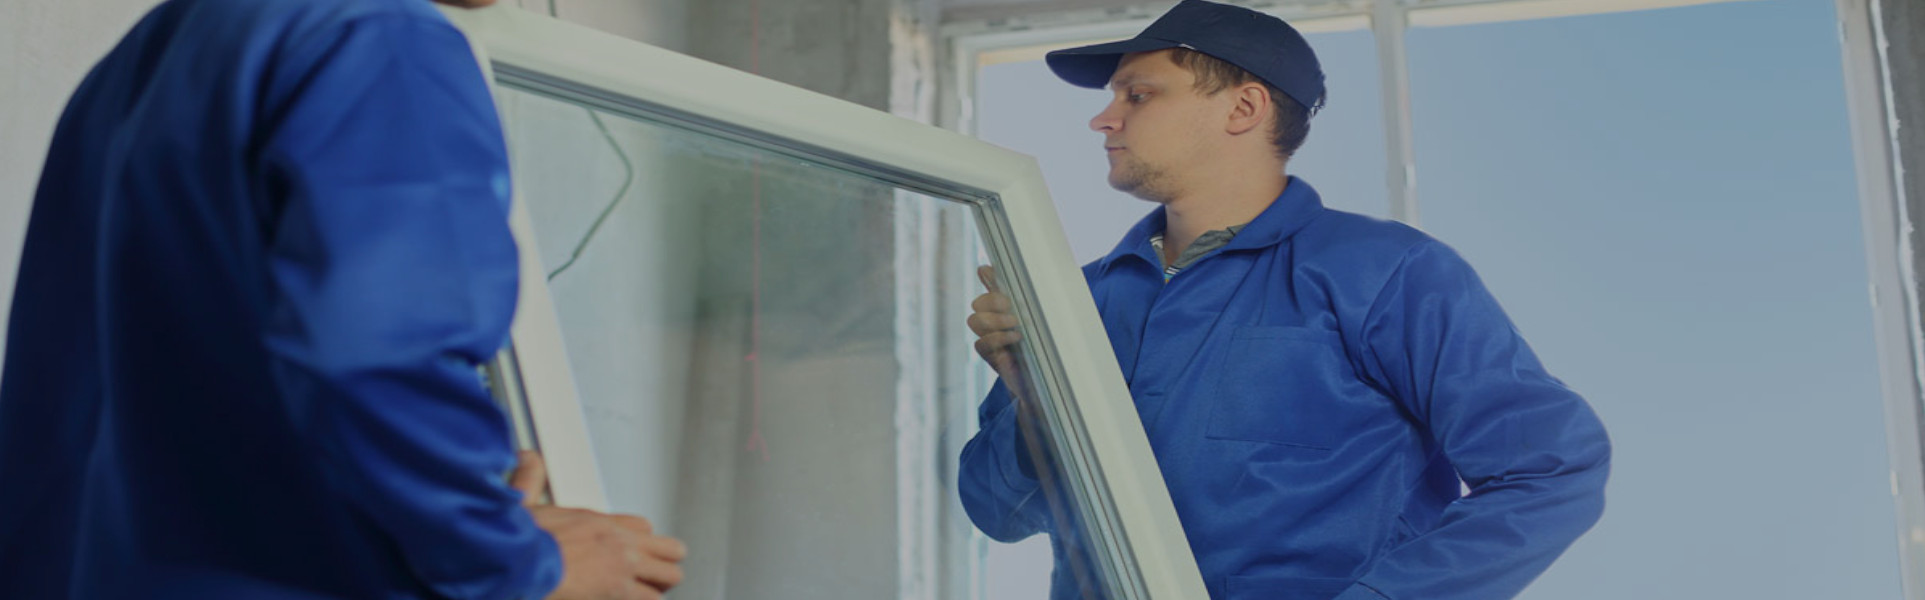 Slider, Double Glazing Installers in North Finchley, Woodside Park, N12